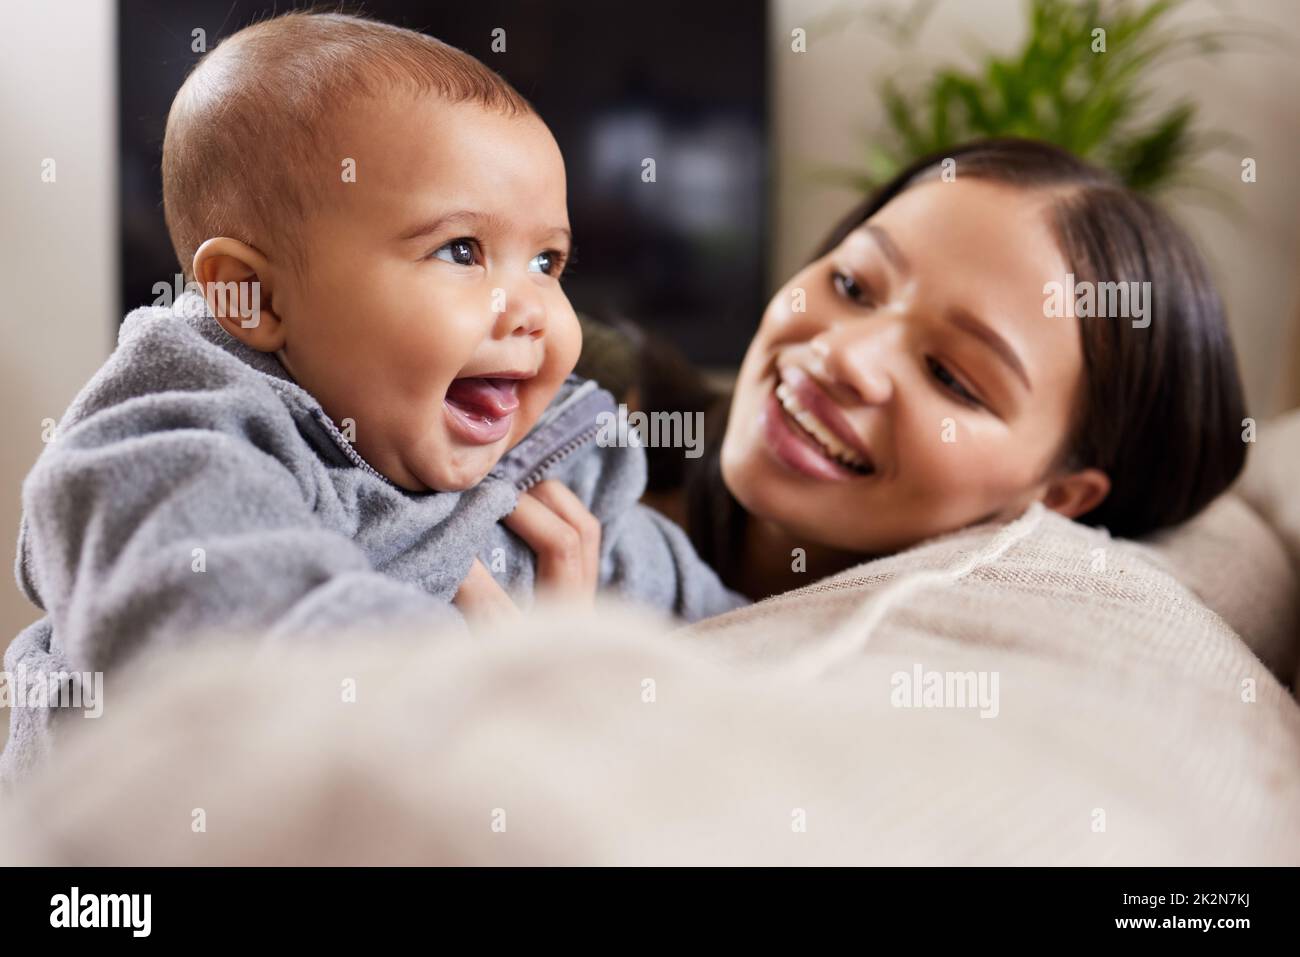 A babys smile can give you power. Shot of a young woman relaxing with her adorable baby on the sofa at home. Stock Photo